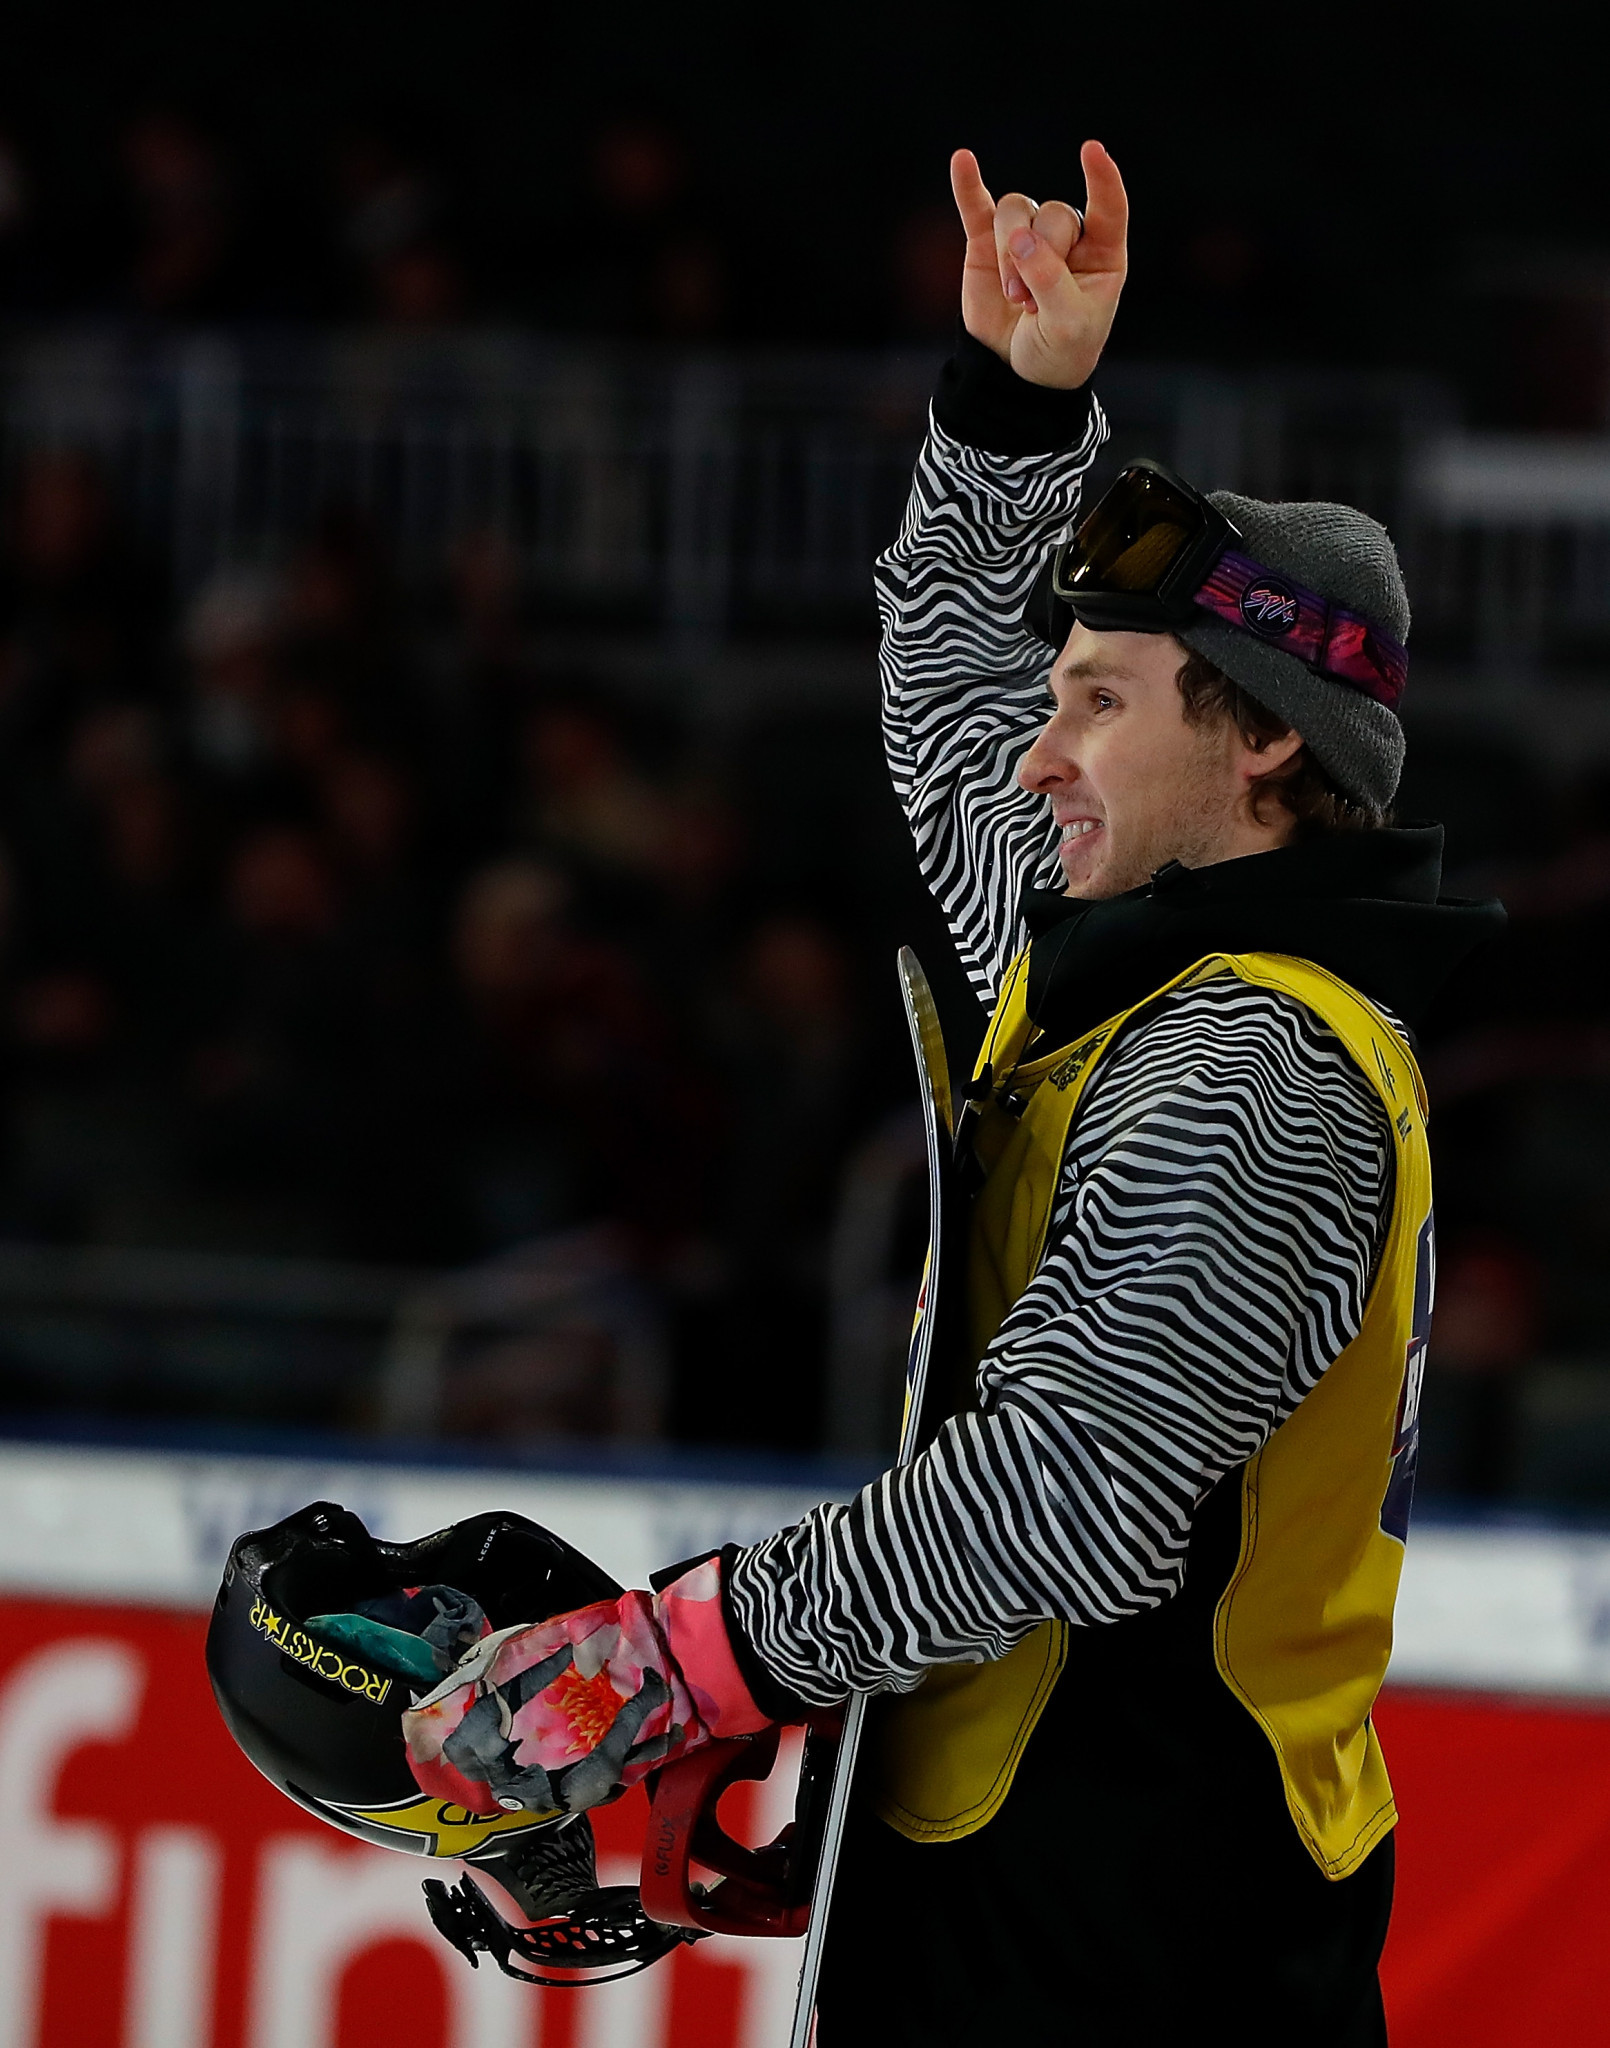 Chris Corning produced a home win in Atlanta to secure the overall FIS Snowboard Big Air World Cup title ©Getty Images